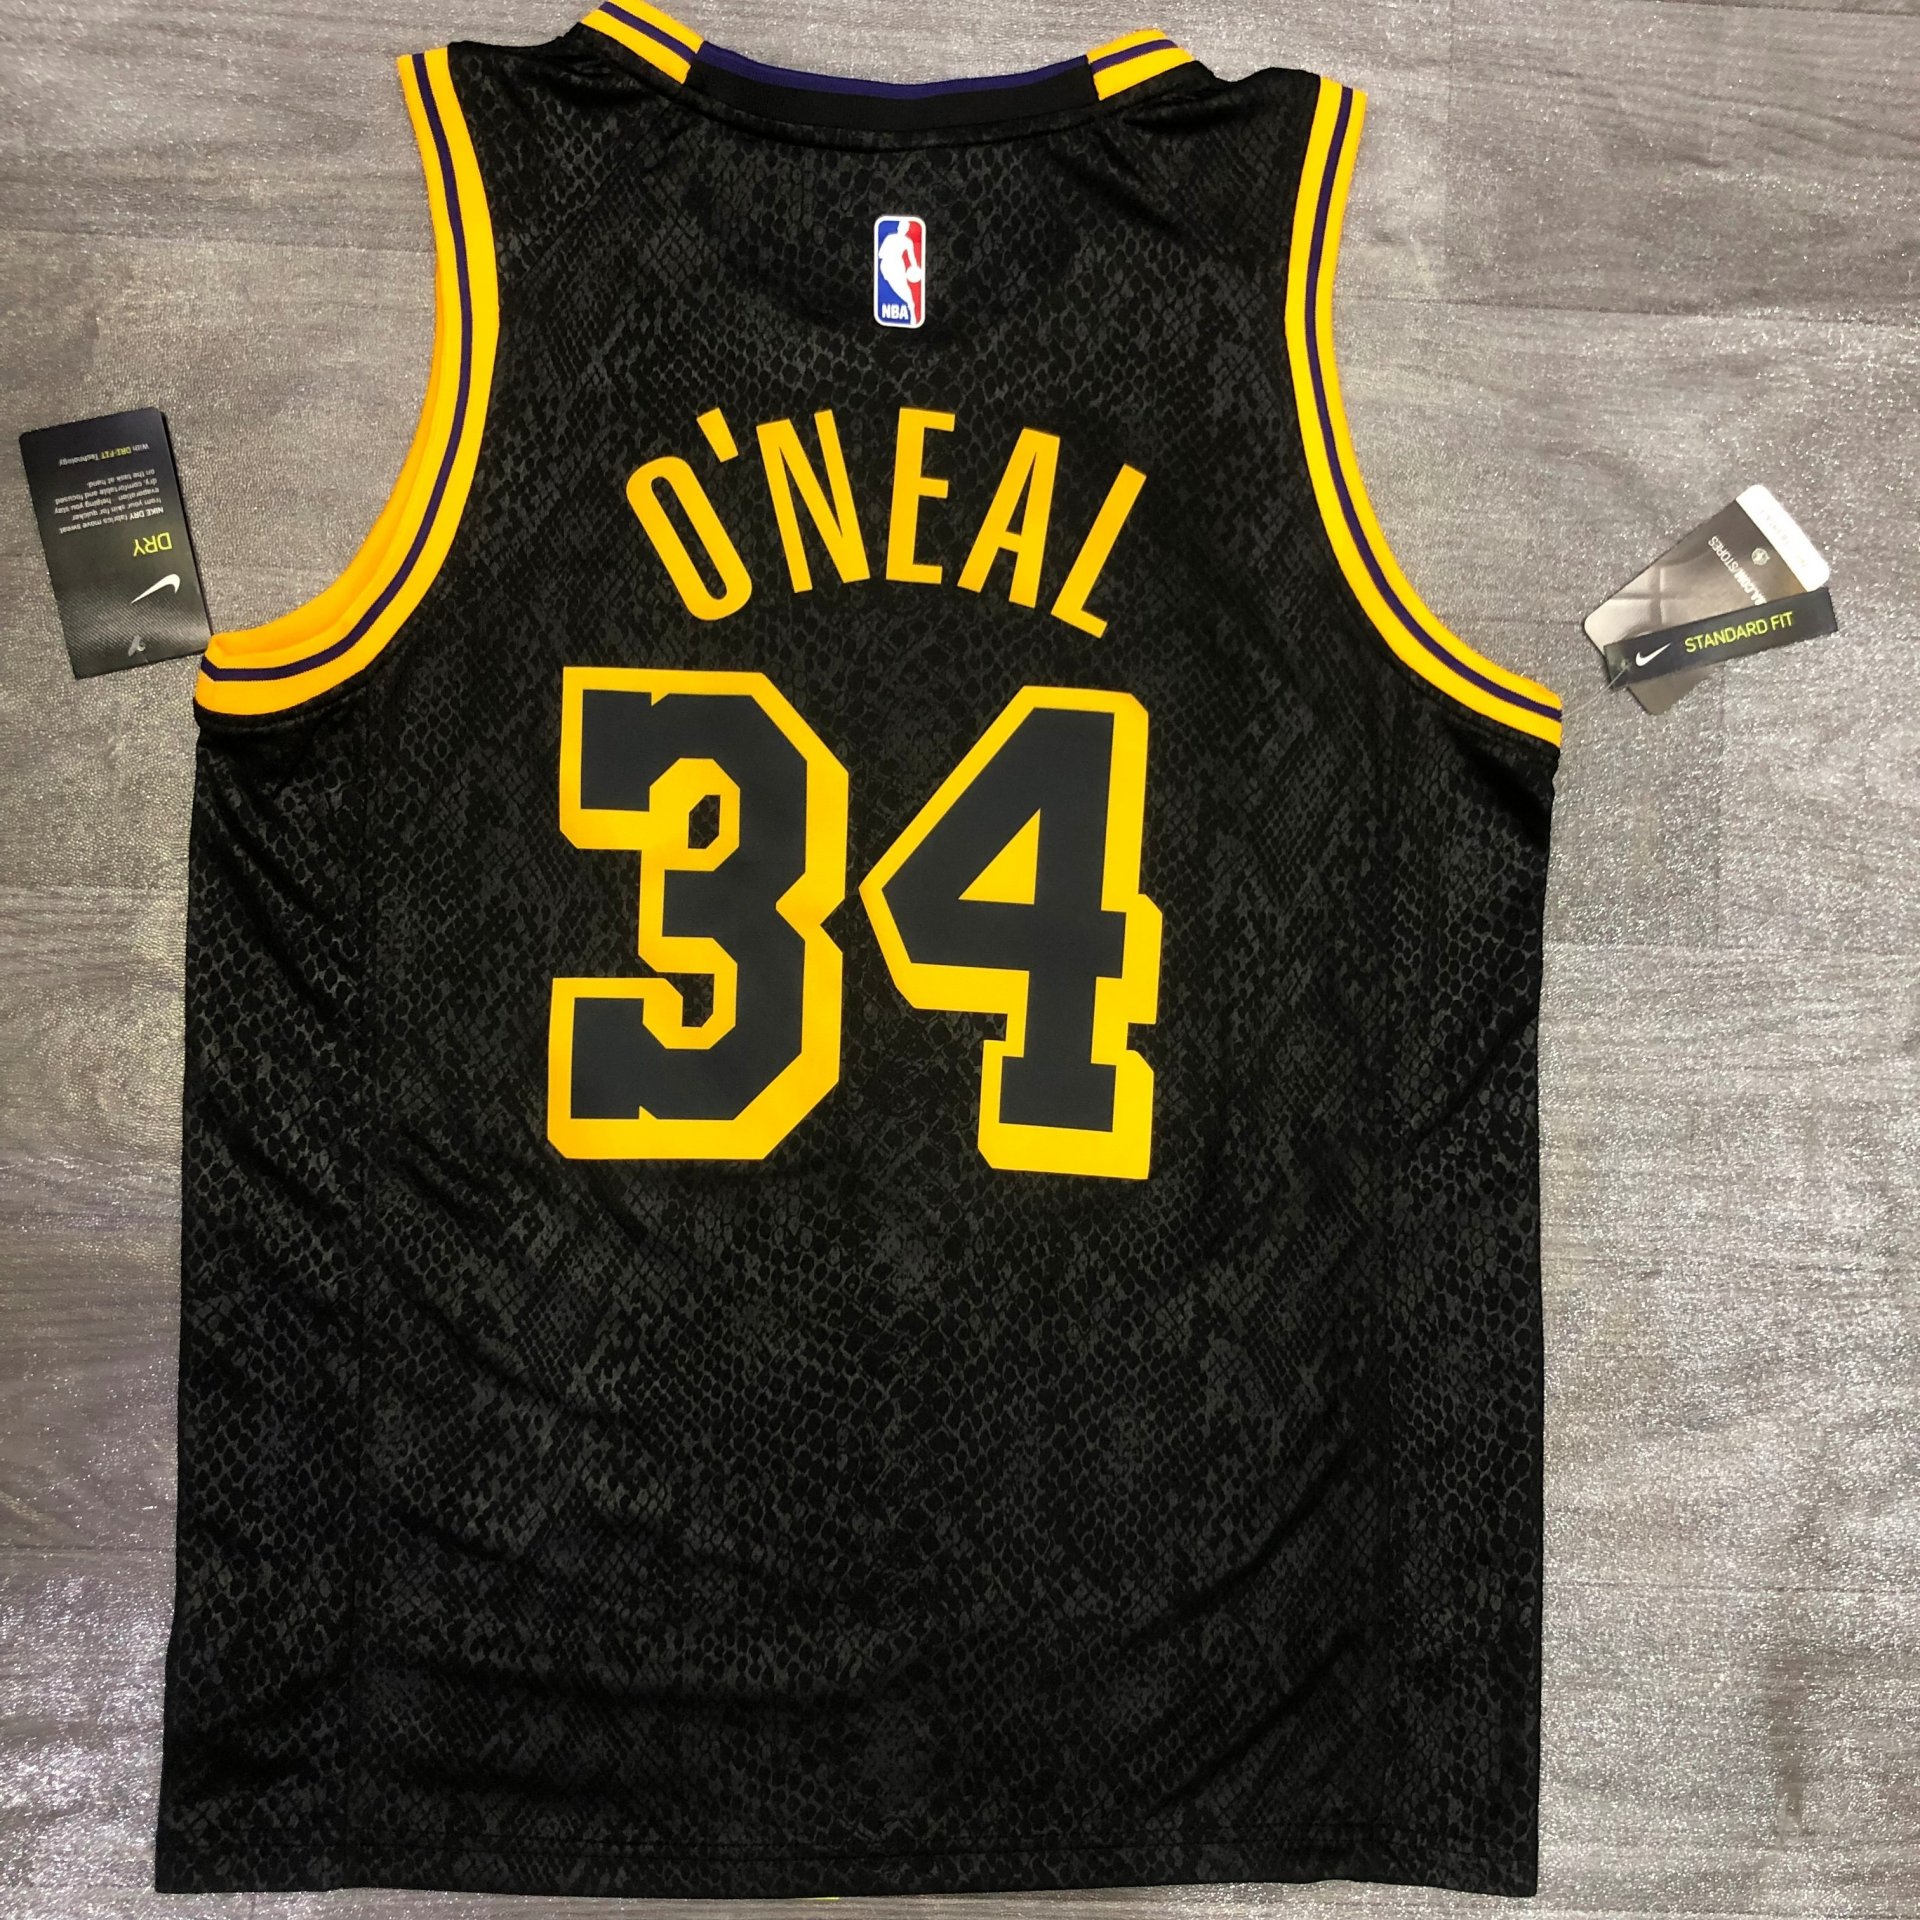 Authentic Nike SHAQUILLE O'NEAL #34 Los Angeles Lakers Jersey Size